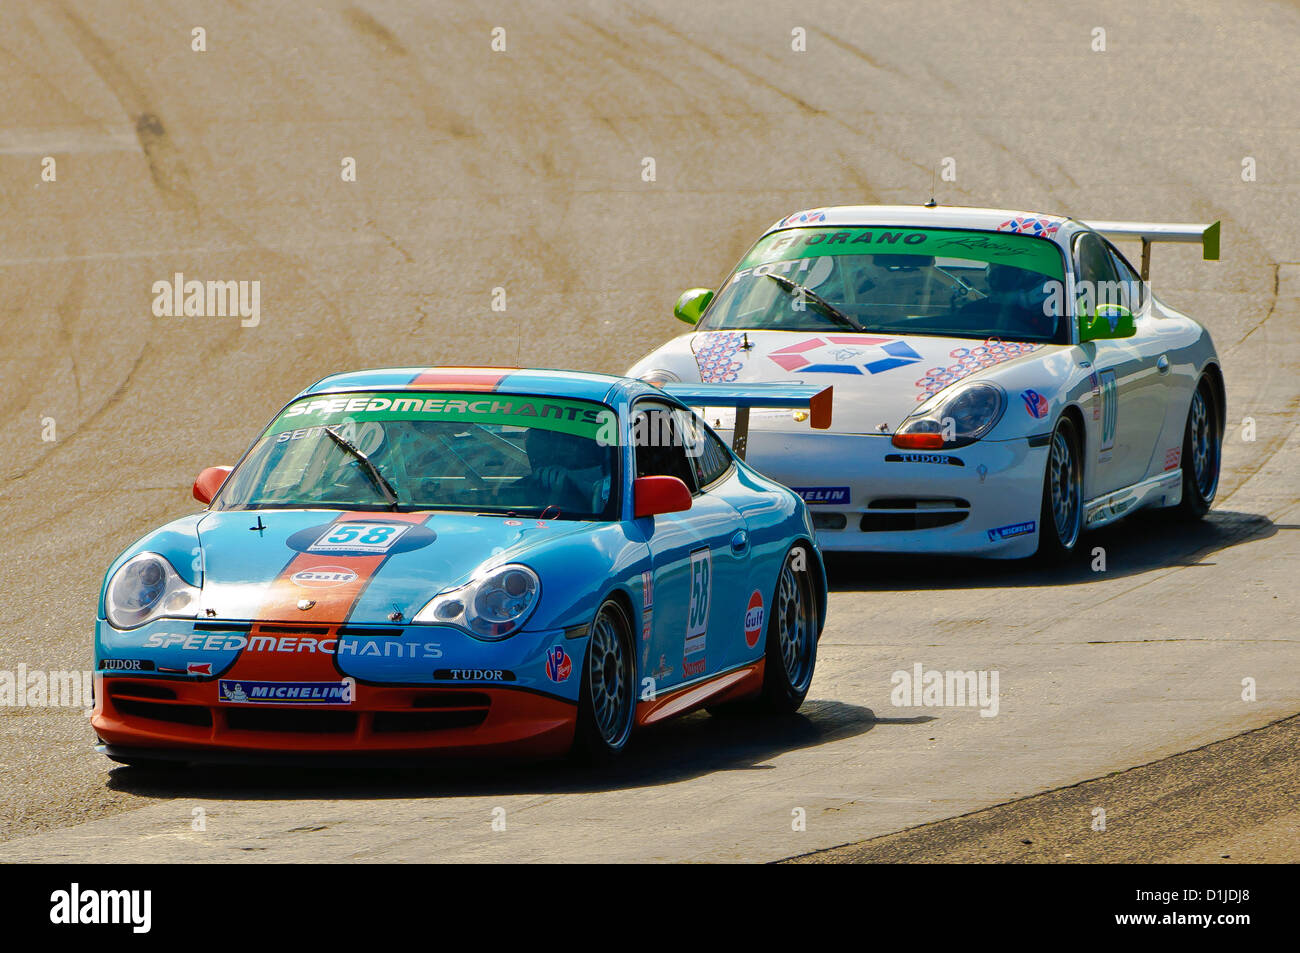 Porsche CT3 Cup Challenge drivers battle for position during their series' penultimate event of the season on Saturday. Stock Photo